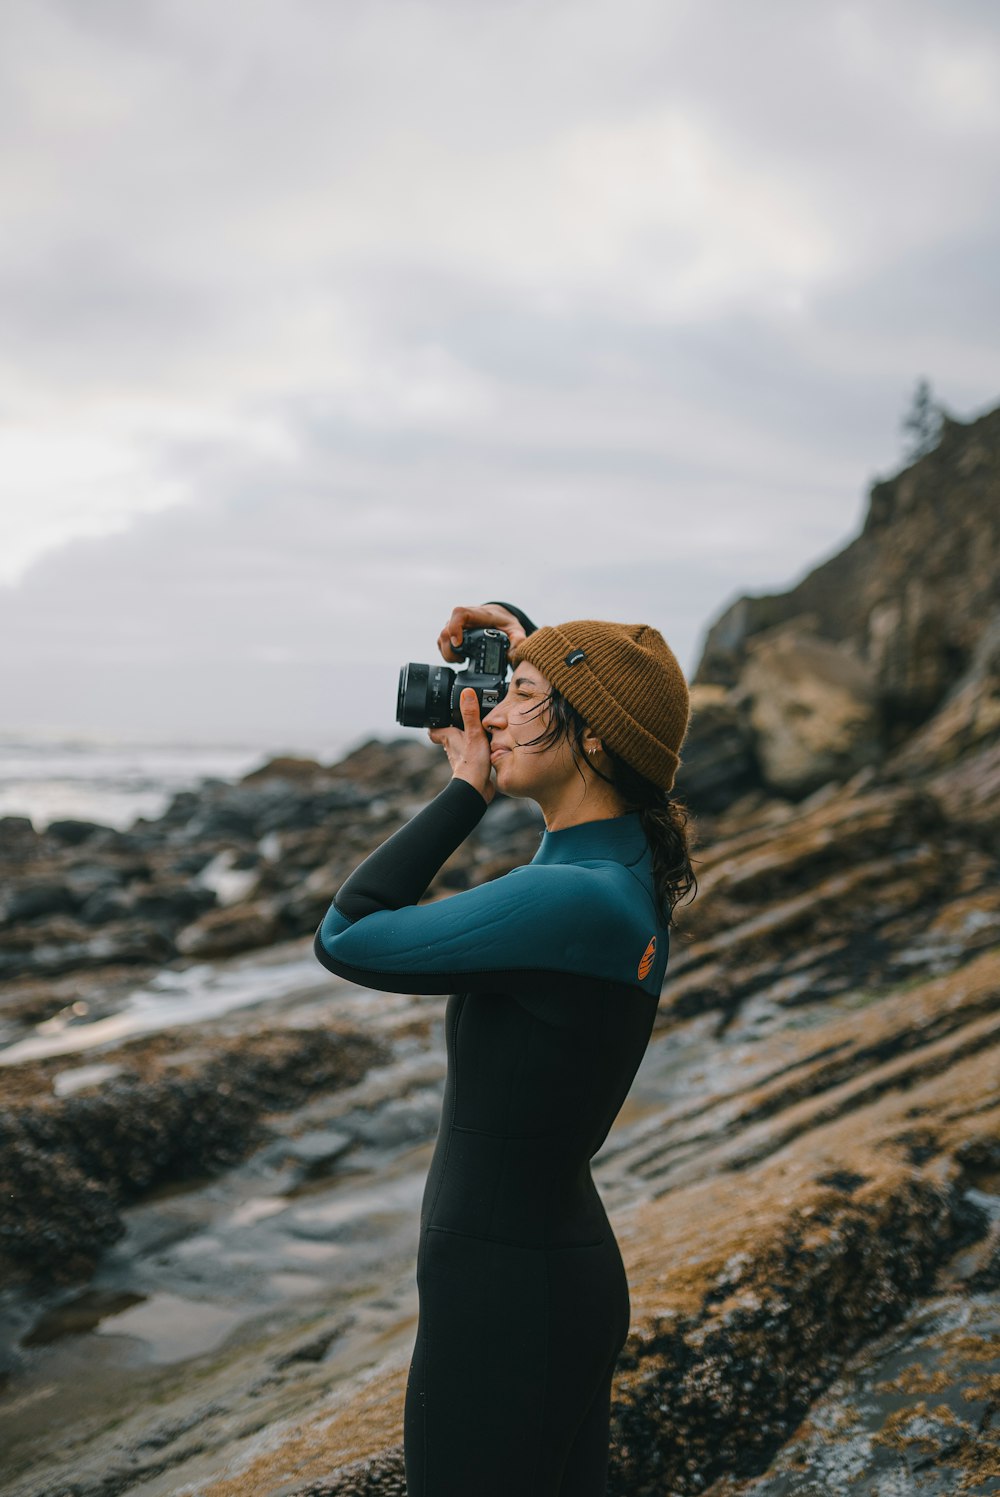 a woman standing on a rocky beach taking a picture